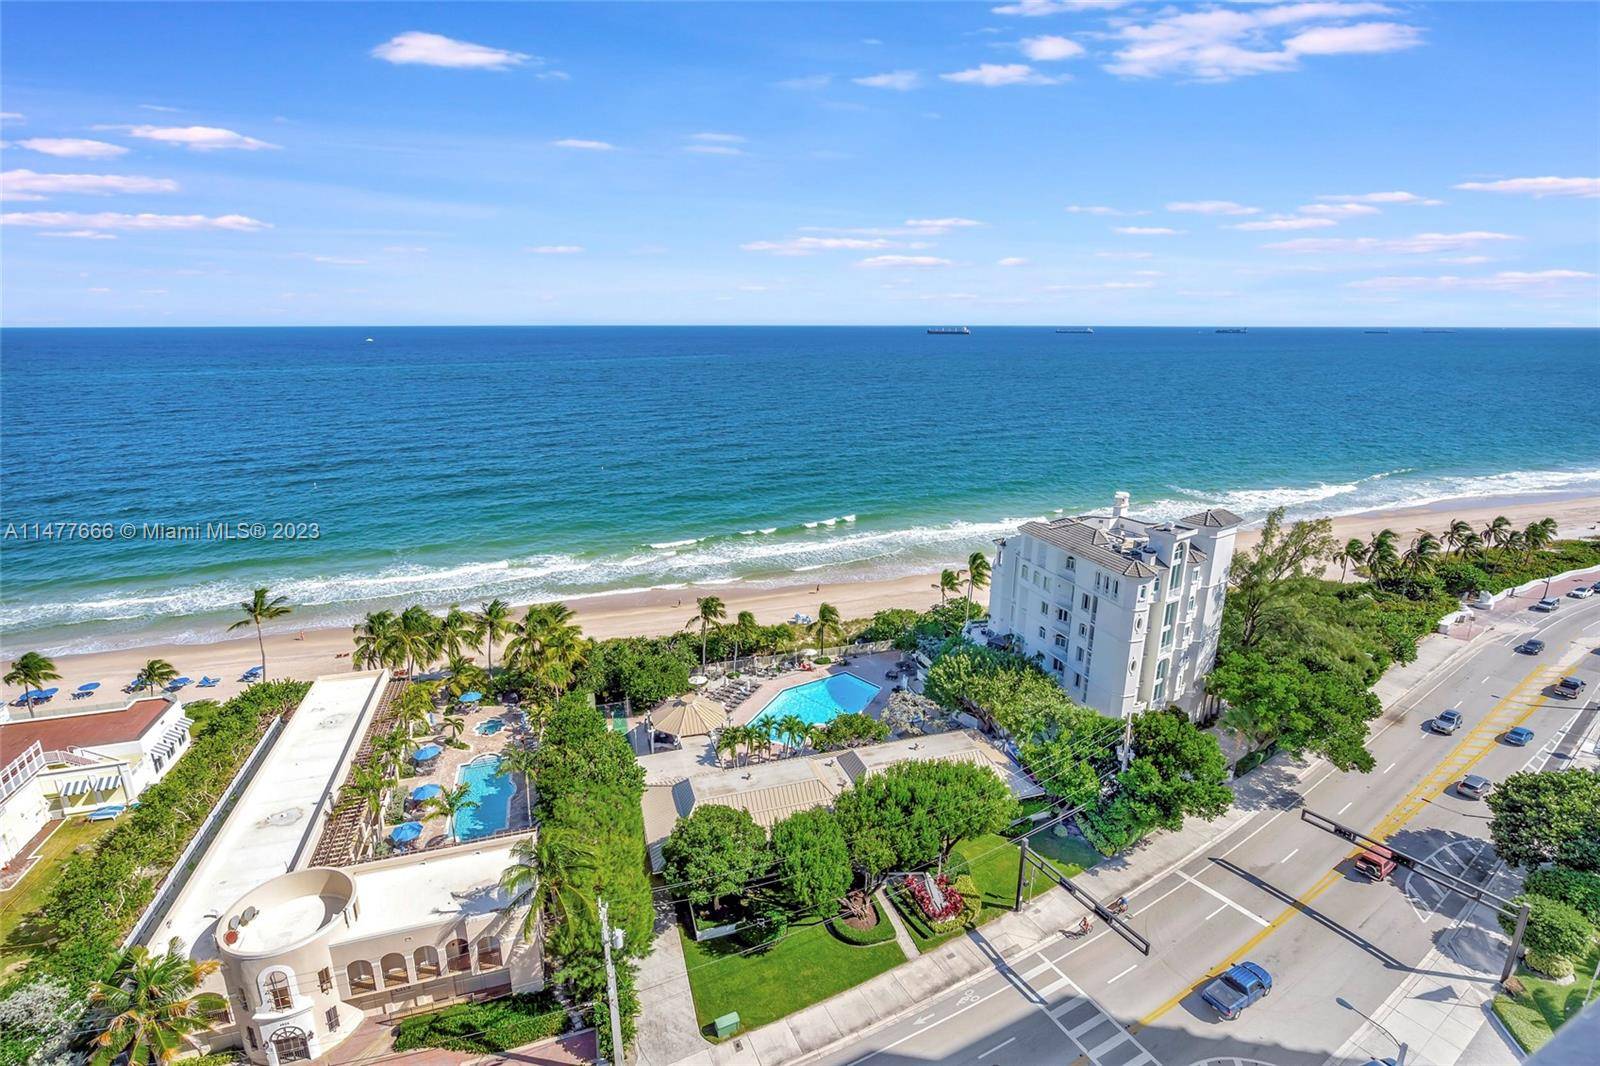 Rarely available Penthouse in fabulous Shore Club with direct ocean views from living room, kitchen and balcony.